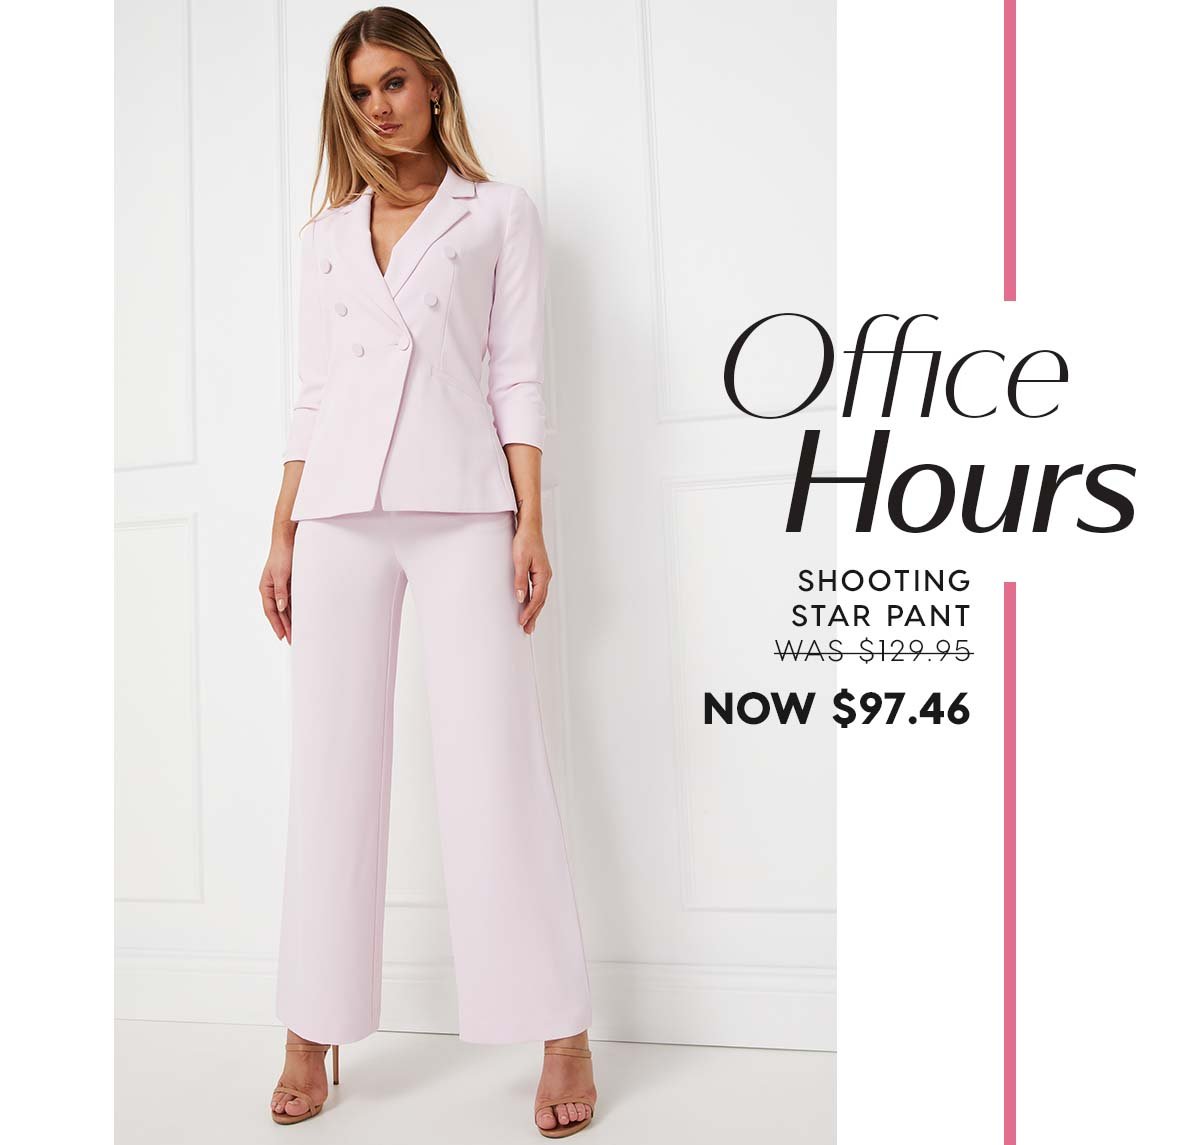 Office Hours. Shooting Star Pant  WAS $129.95 NOW $97.46